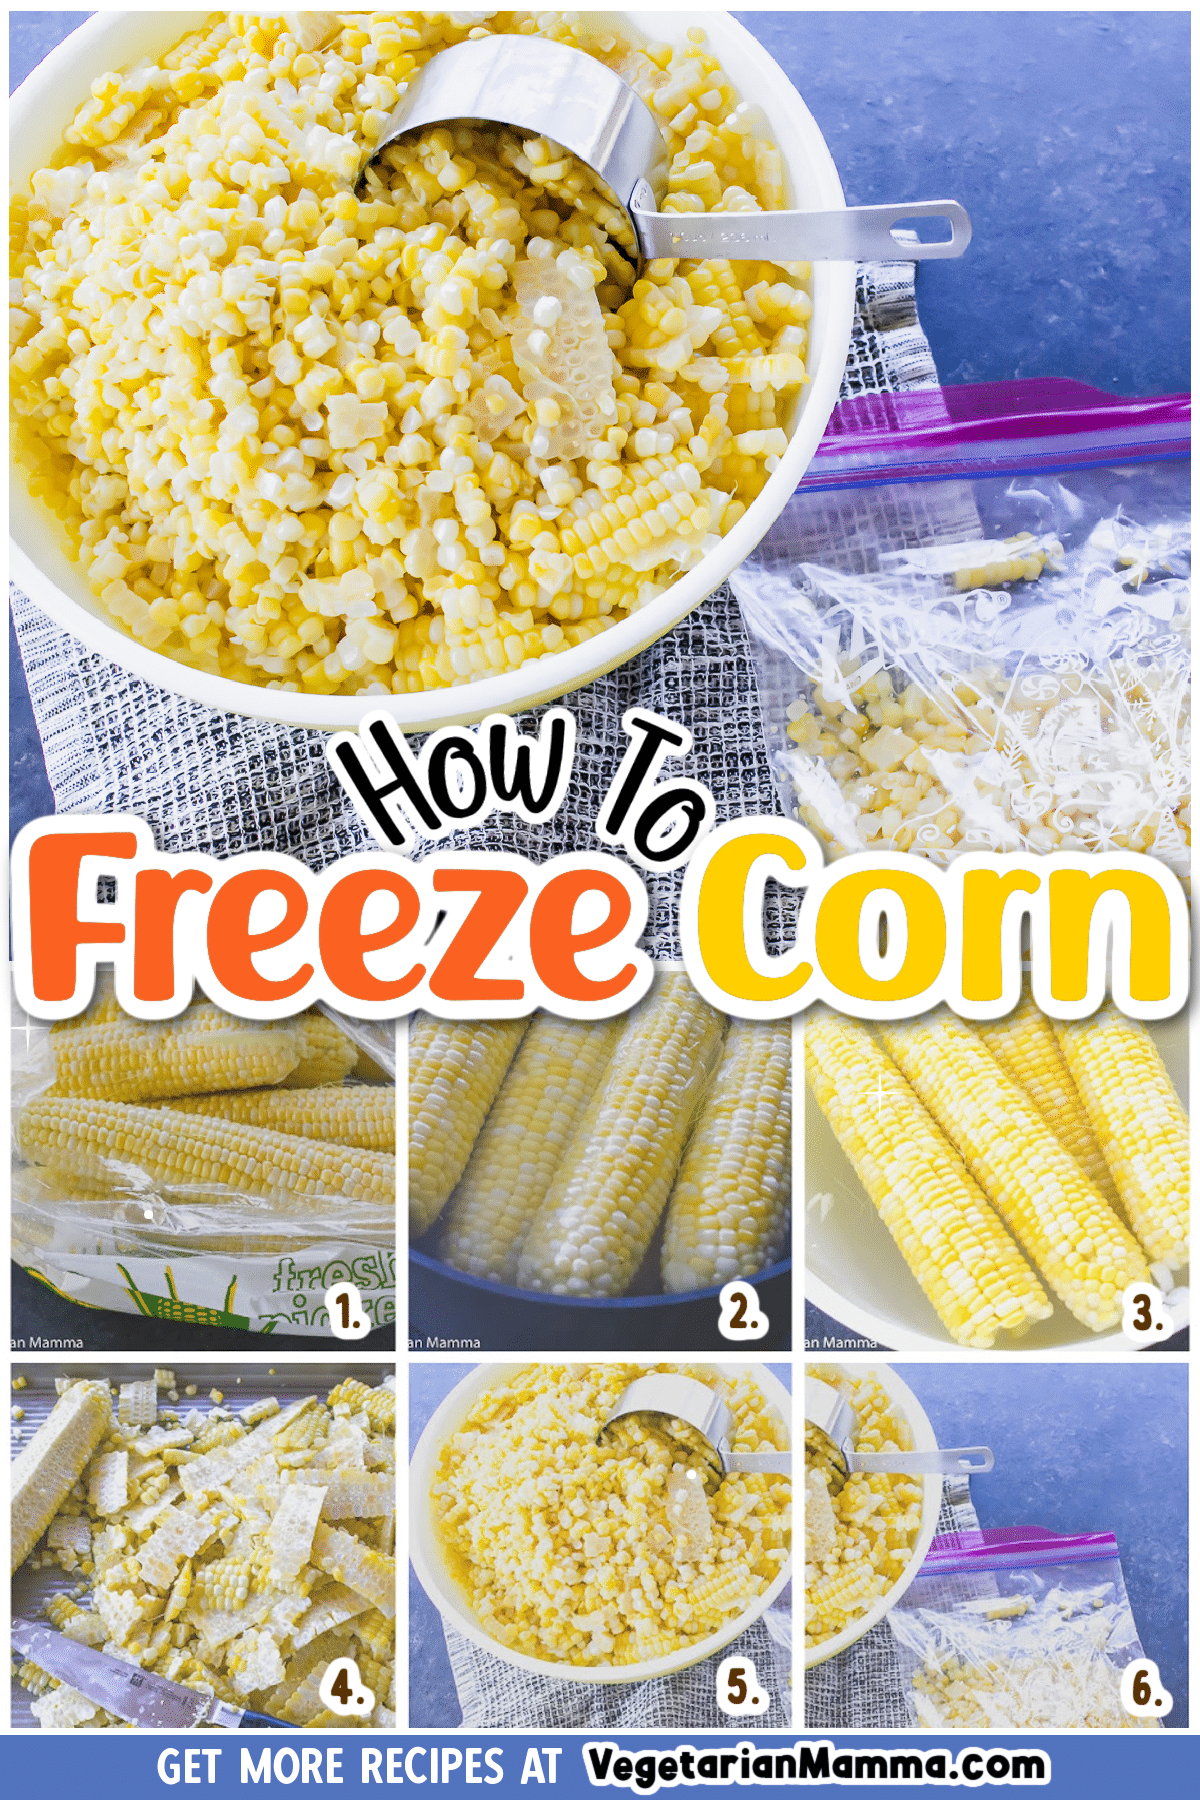 Wondering how to freeze corn on the cob? If so, you are in the right place. We are going to show you just how easy freezing corn can be! #cornonthecob #freezercorn